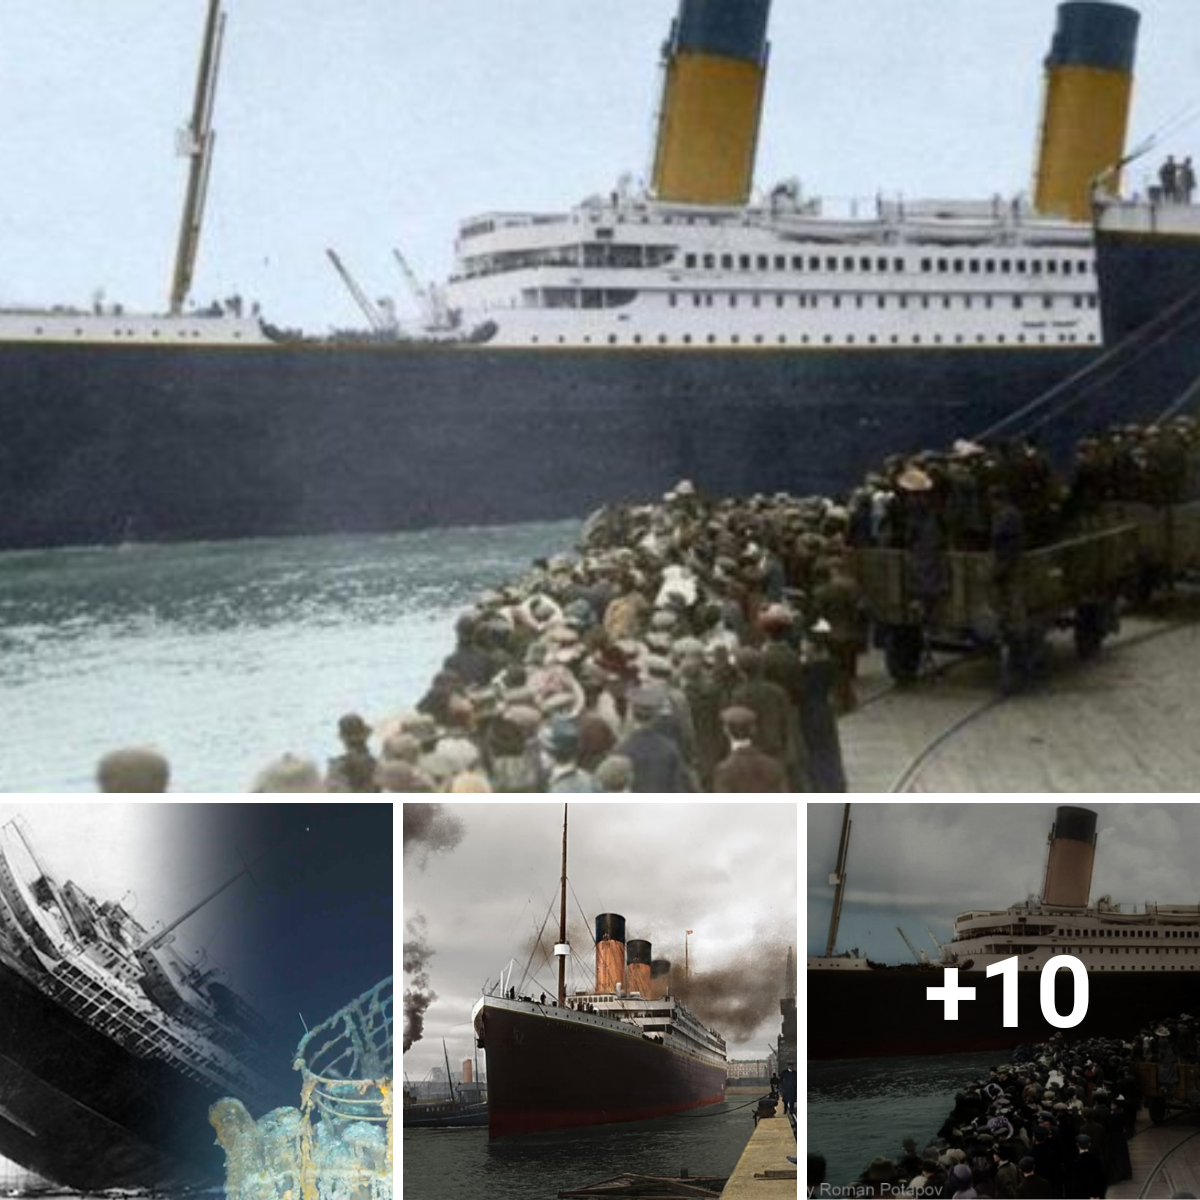 Most recent news: The Titanic’s tragic voyage began when it sailed from Southampton. Today, 112 years ago (Video)